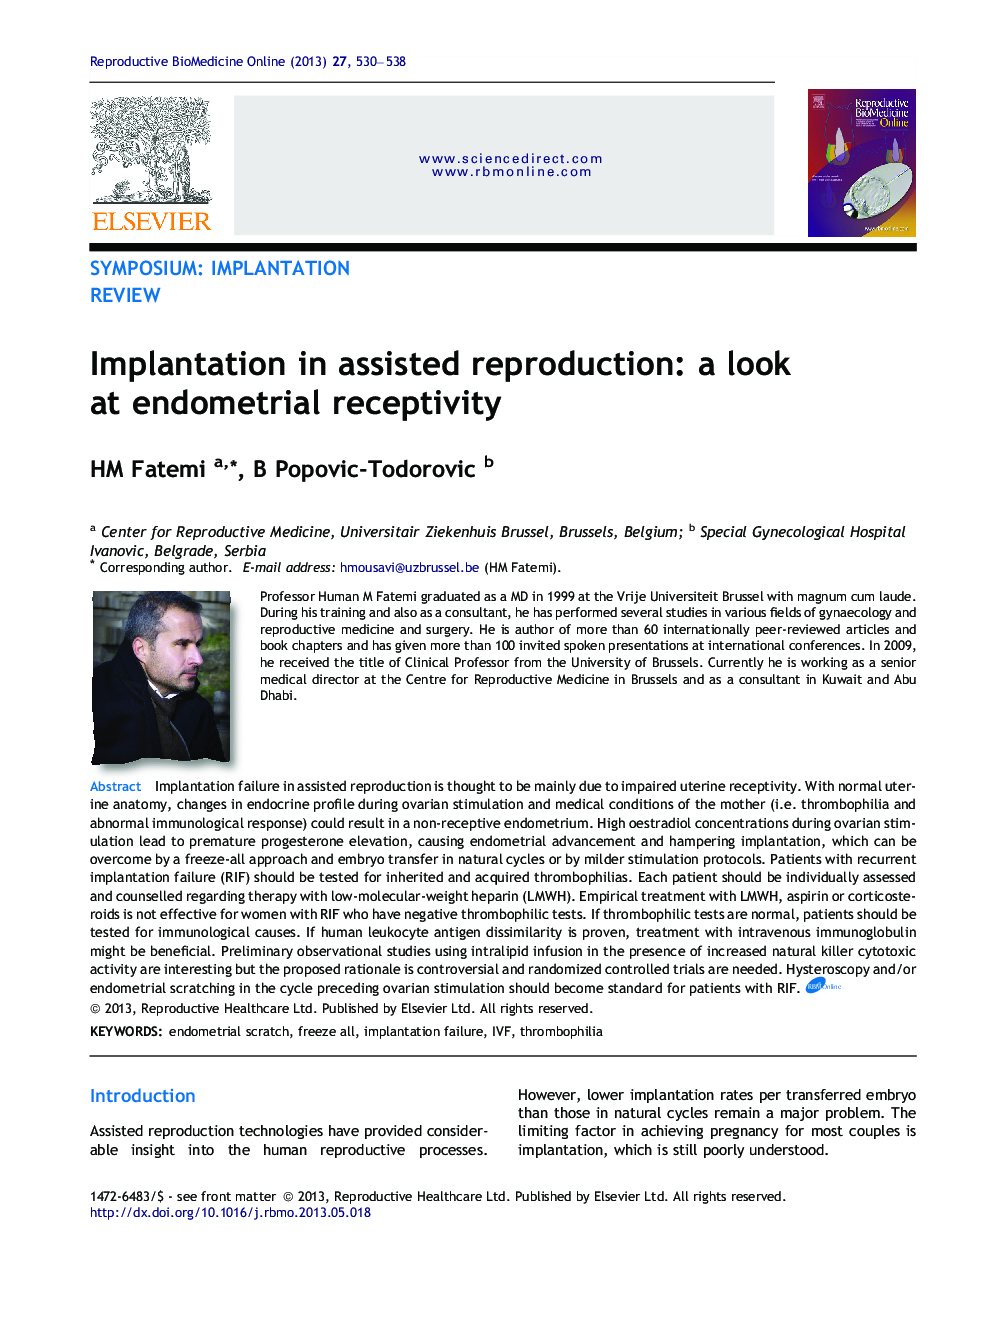 Implantation in assisted reproduction: a look at endometrial receptivity 